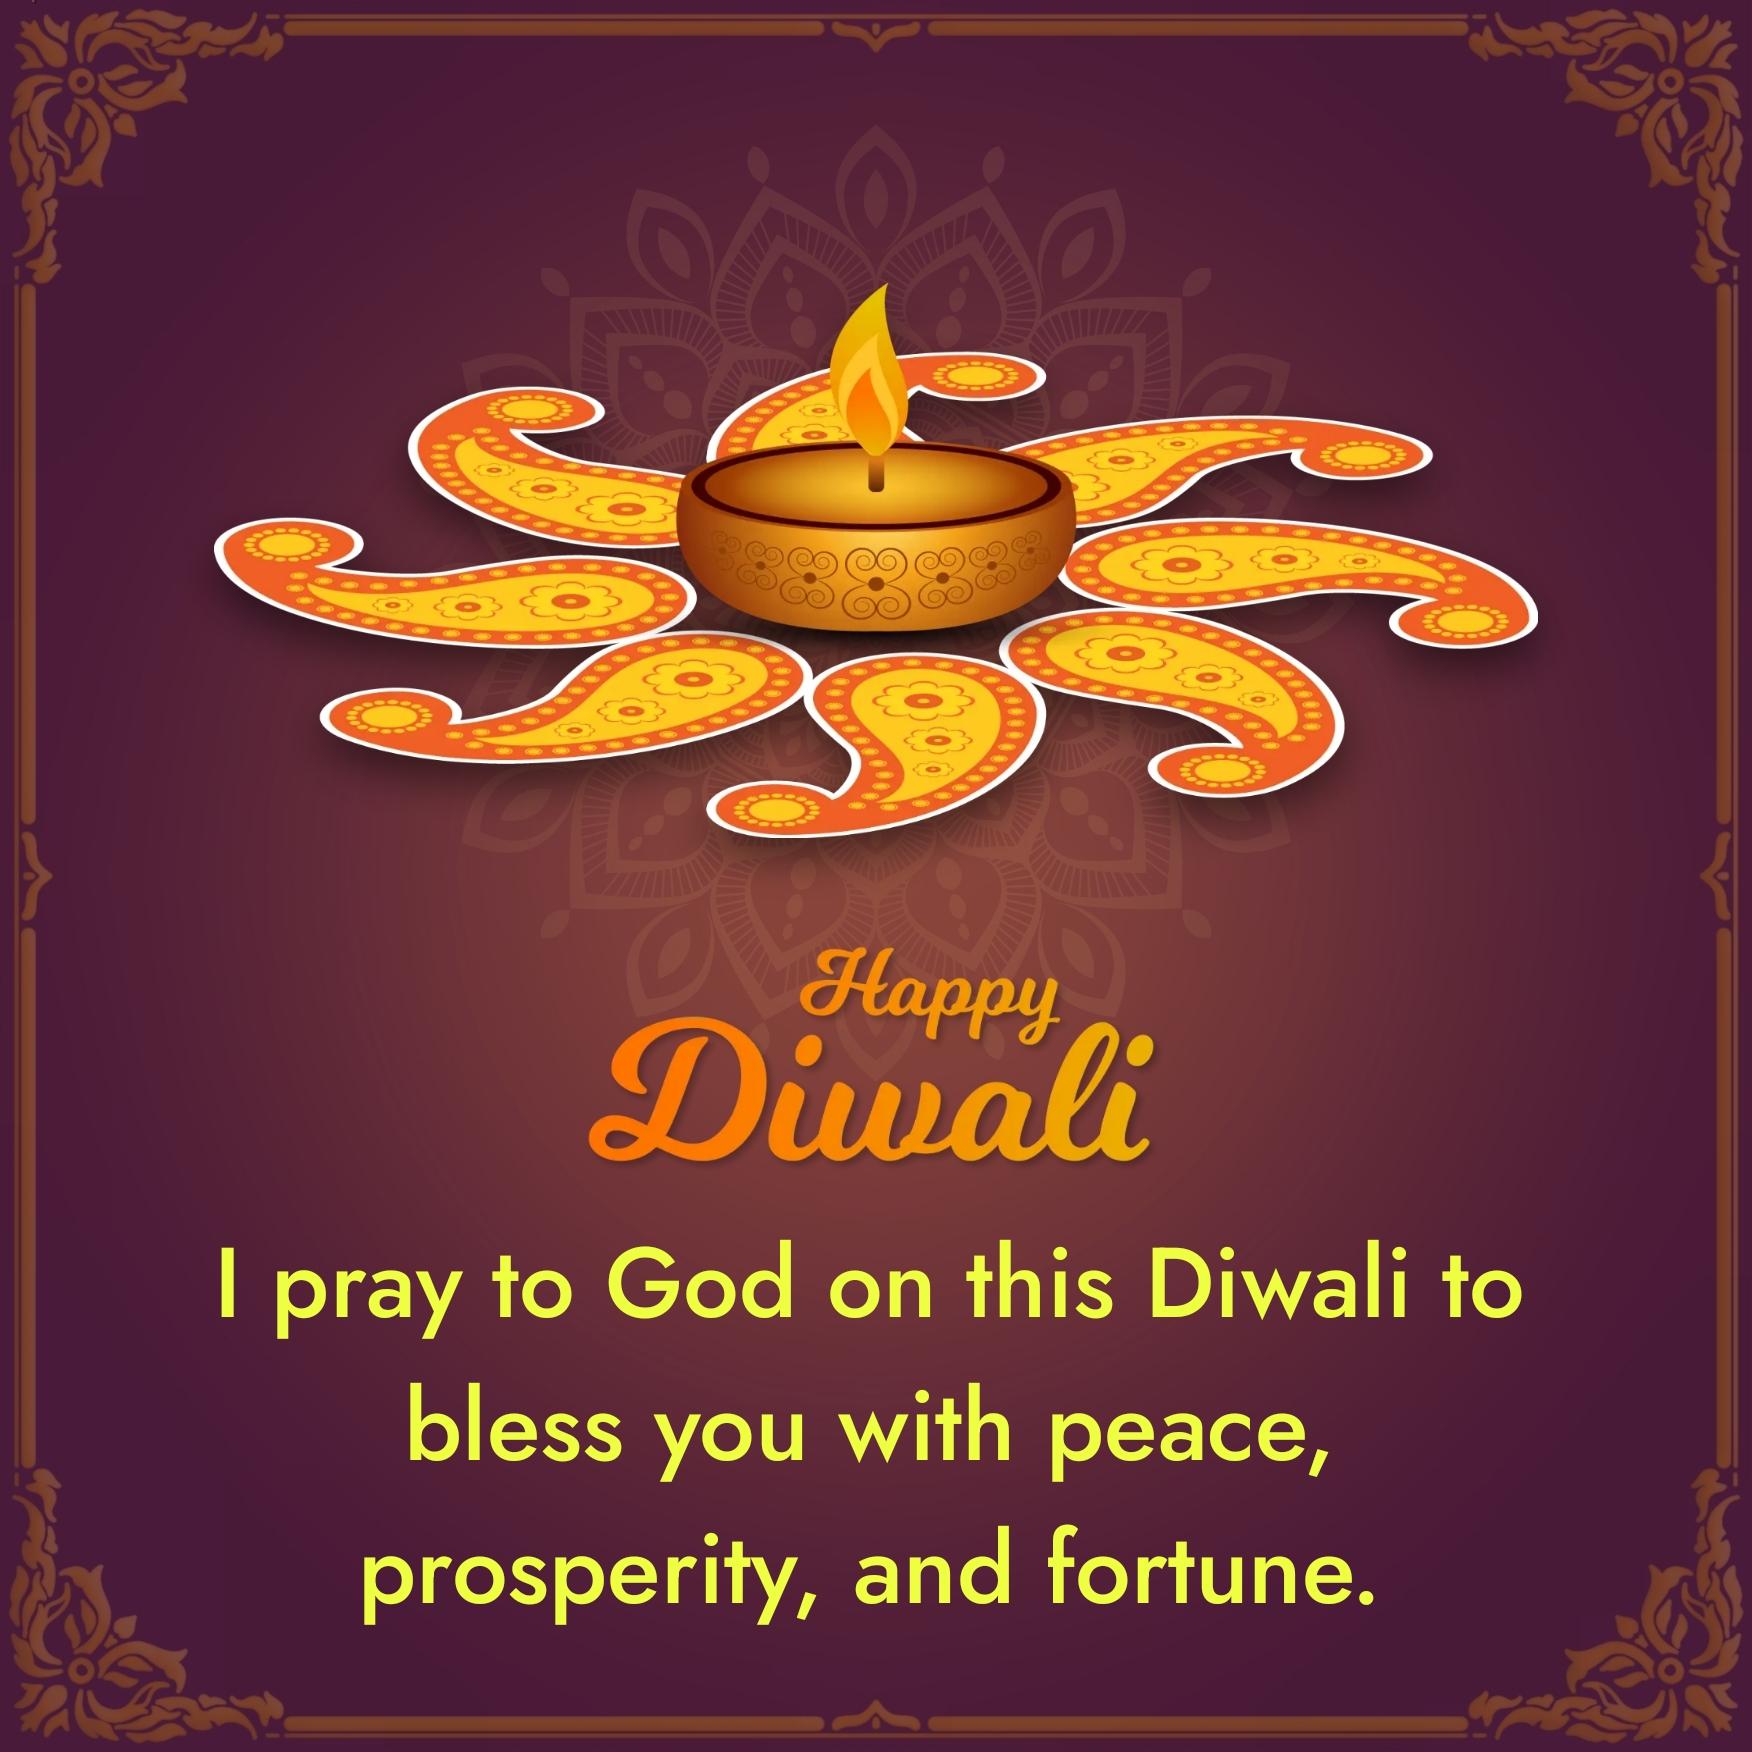 I pray to God on this Diwali to bless you with peace